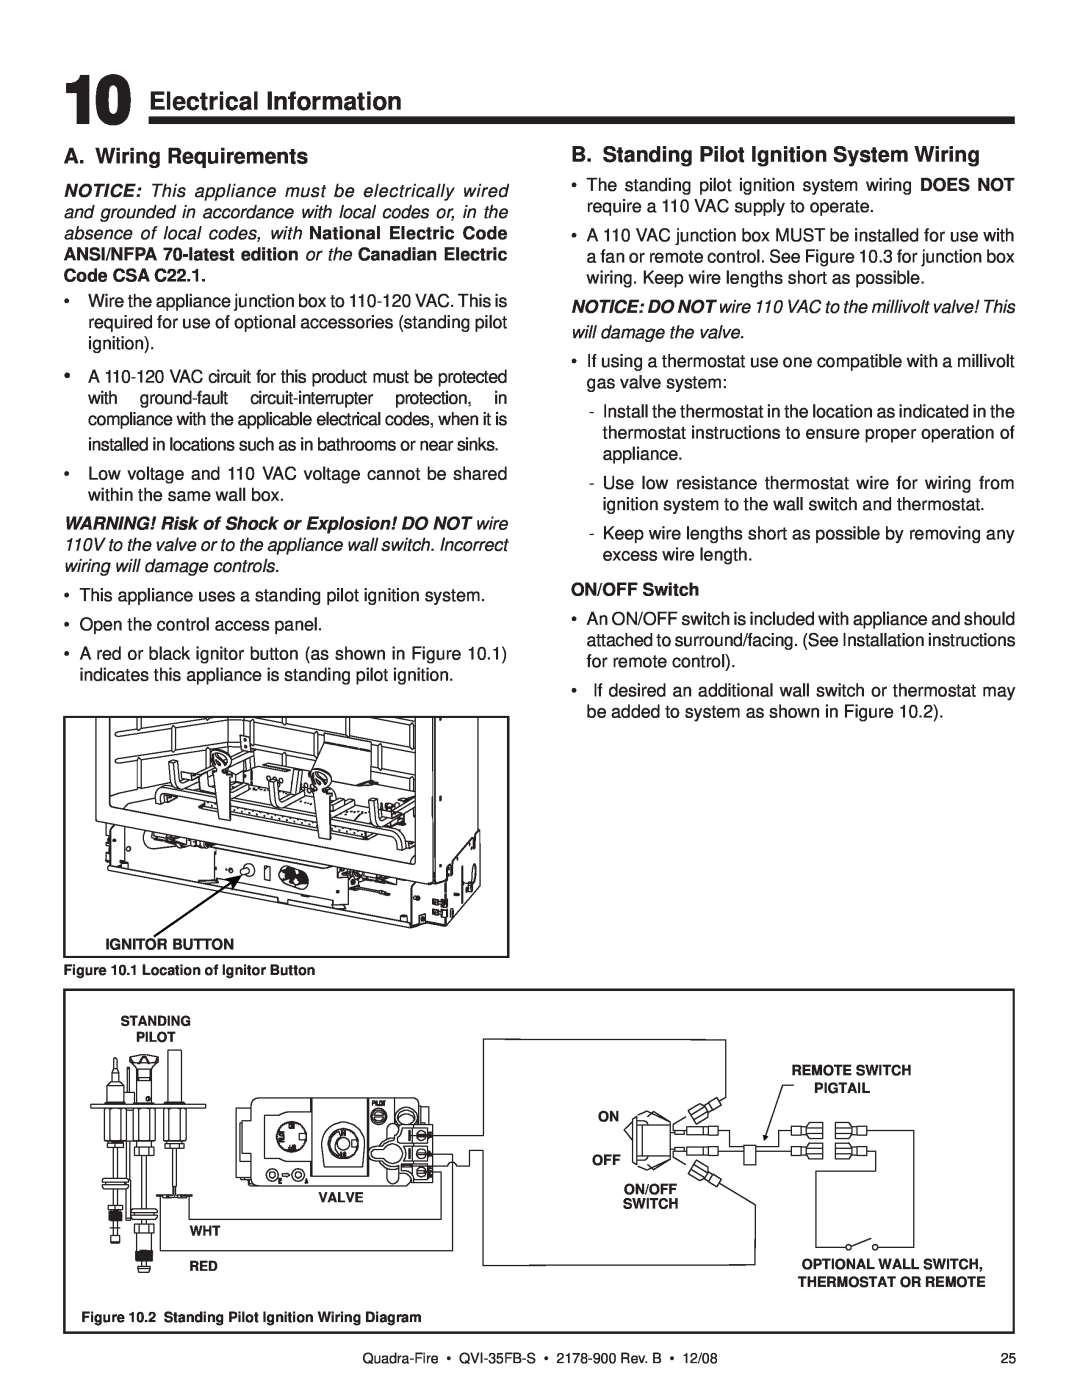 Quadra-Fire QVI-35FB-S Electrical Information, A. Wiring Requirements, B. Standing Pilot Ignition System Wiring 